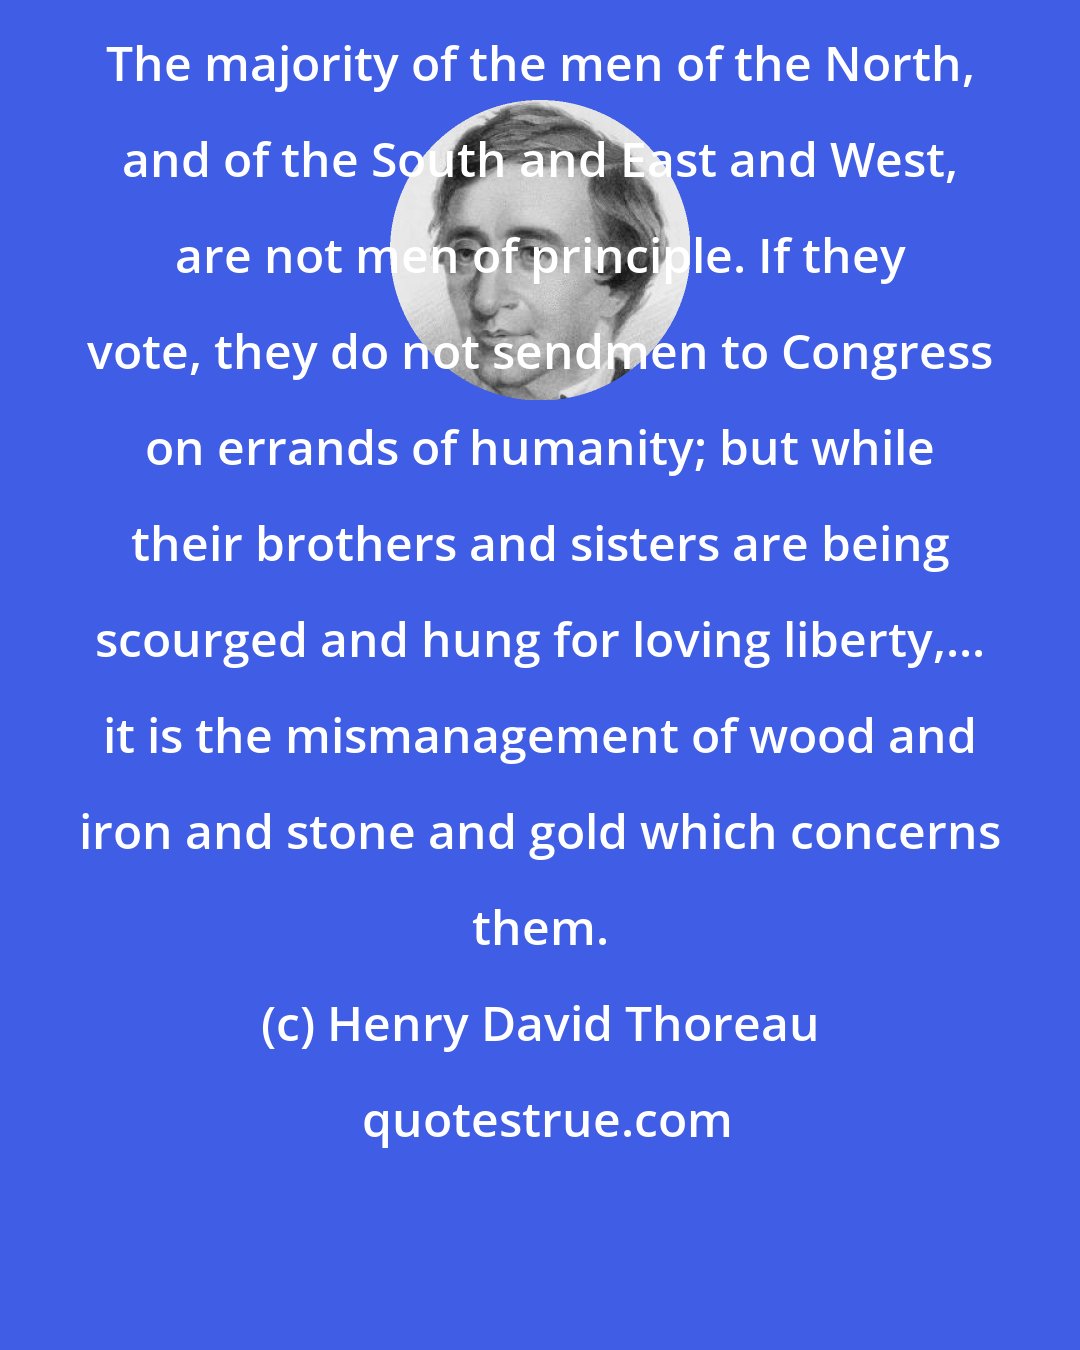 Henry David Thoreau: The majority of the men of the North, and of the South and East and West, are not men of principle. If they vote, they do not sendmen to Congress on errands of humanity; but while their brothers and sisters are being scourged and hung for loving liberty,... it is the mismanagement of wood and iron and stone and gold which concerns them.